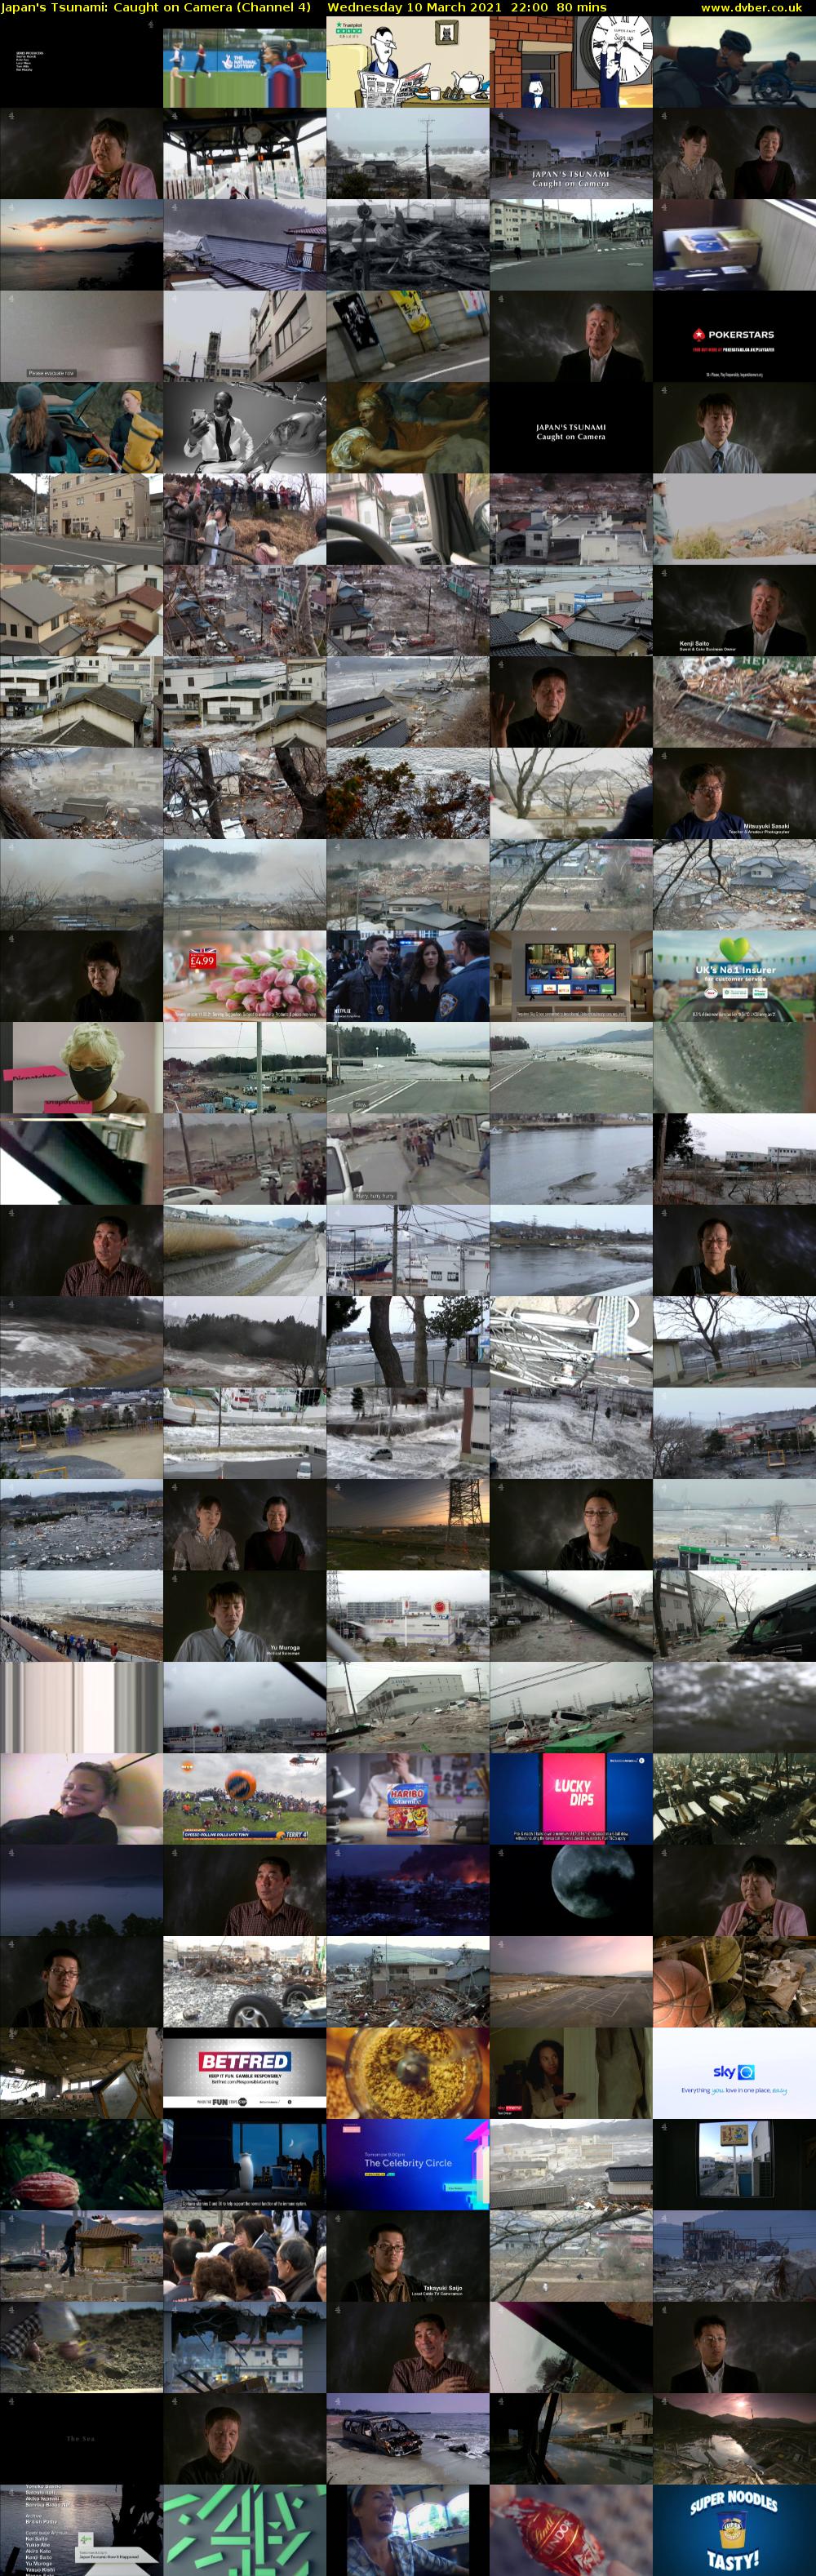 Japan's Tsunami: Caught on Camera (Channel 4) Wednesday 10 March 2021 22:00 - 23:20